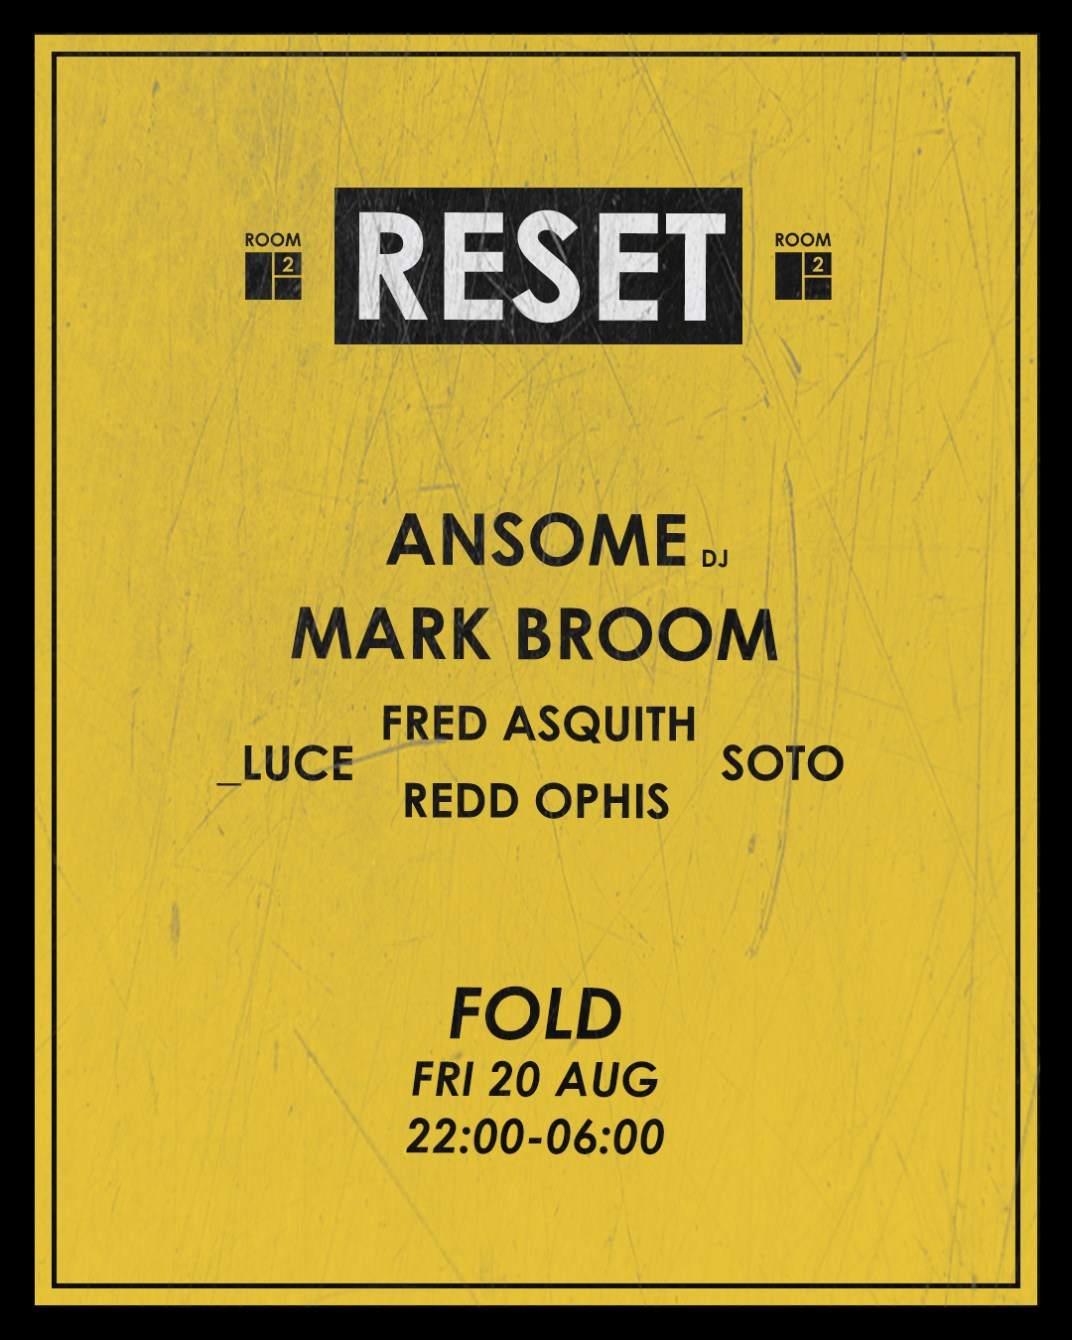 Room 2 // 009: Reset - Ansome, Mark Broom & More - フライヤー裏